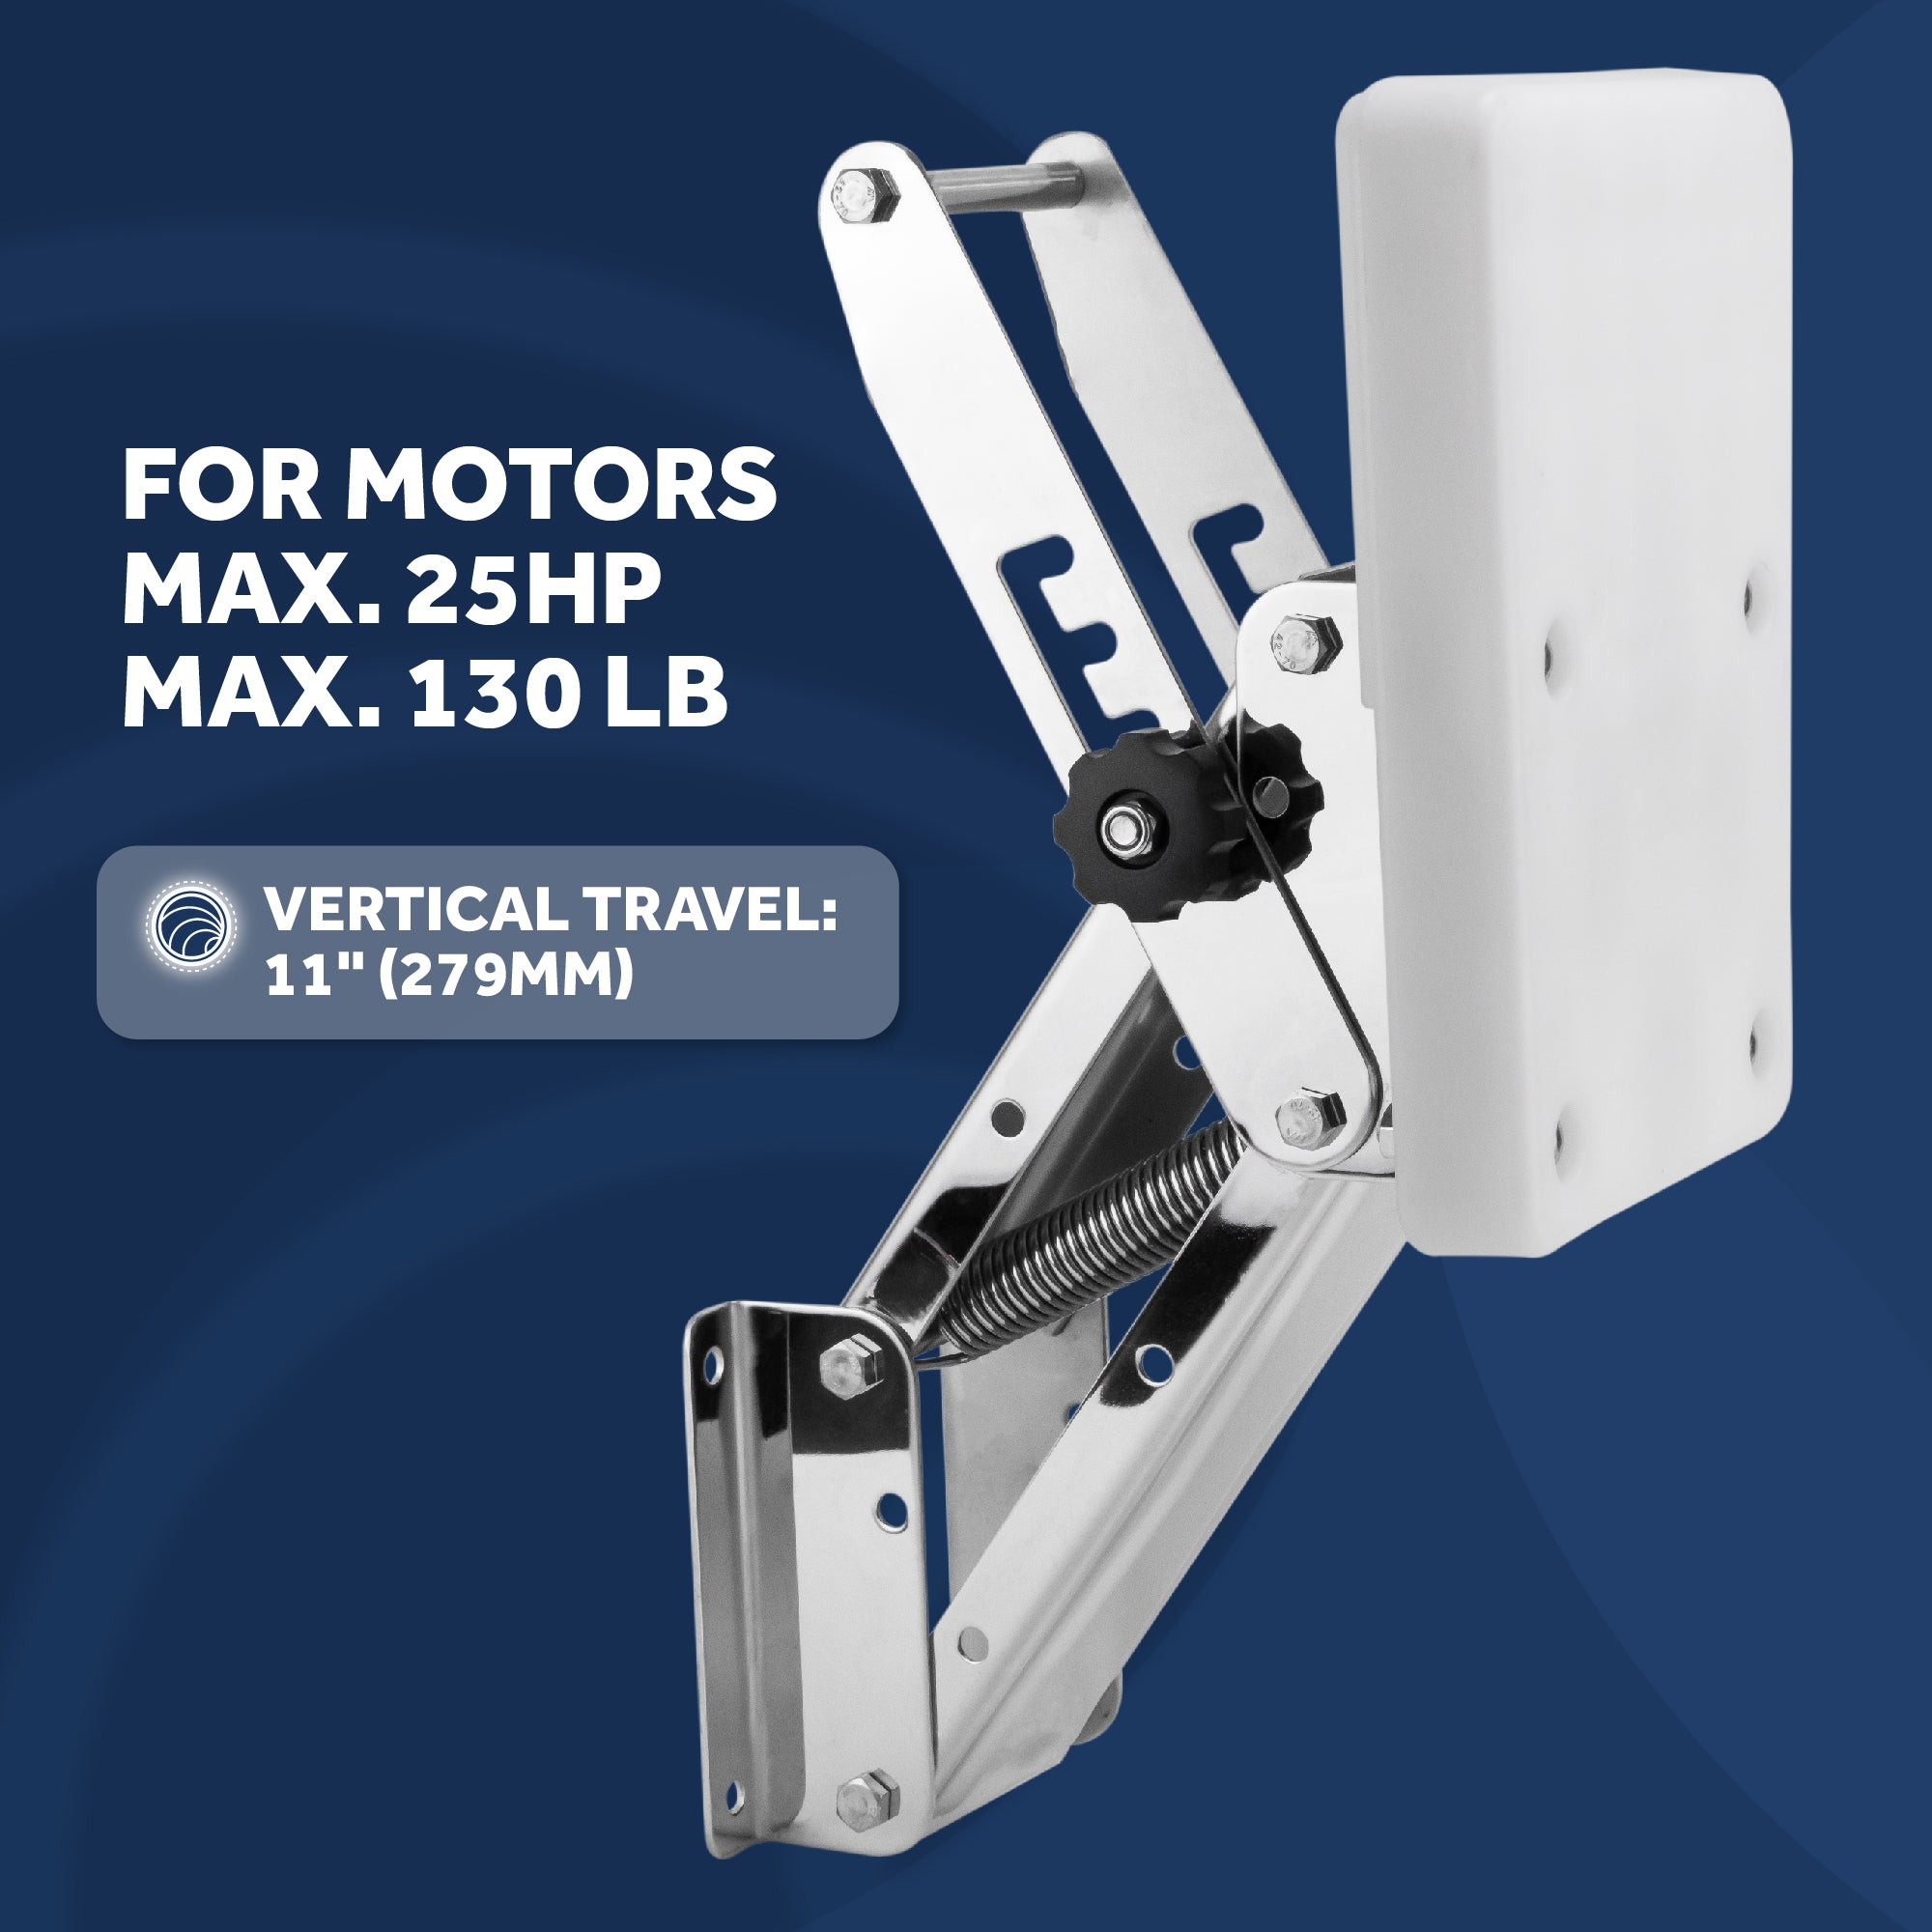 Adjustable Outboard Motor Bracket, Max. 25 Hp, Max. 130 Lb, 11-Inch of Travel, 316 Stainless Steel, White Board - FO4203